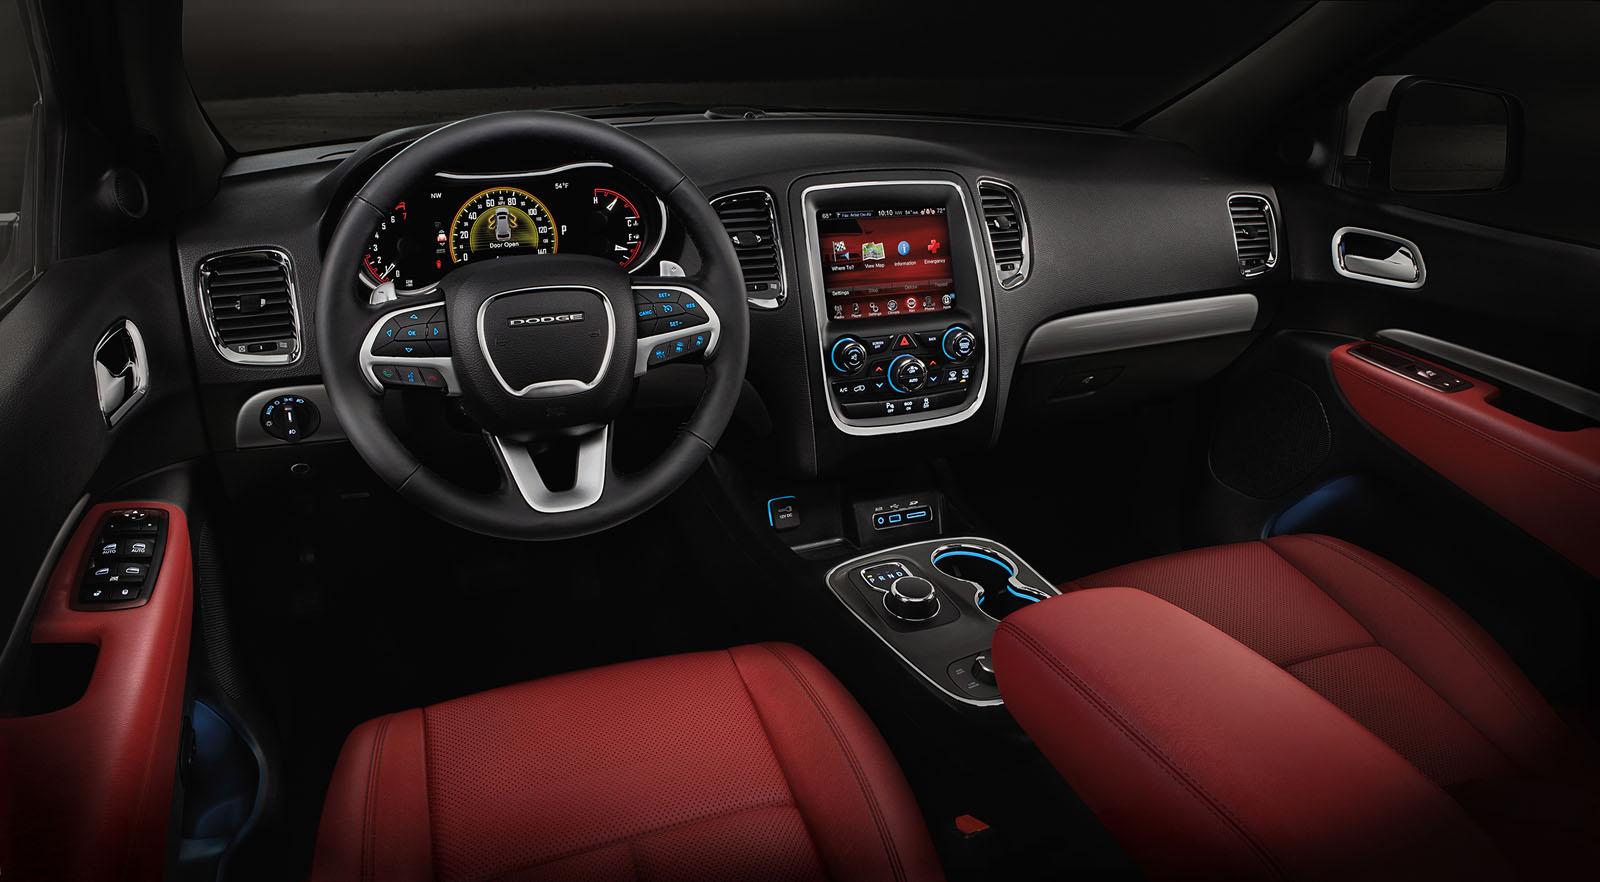 2015 Dodge Durango Radar Red Nappa Leather Seats Now Available on the R